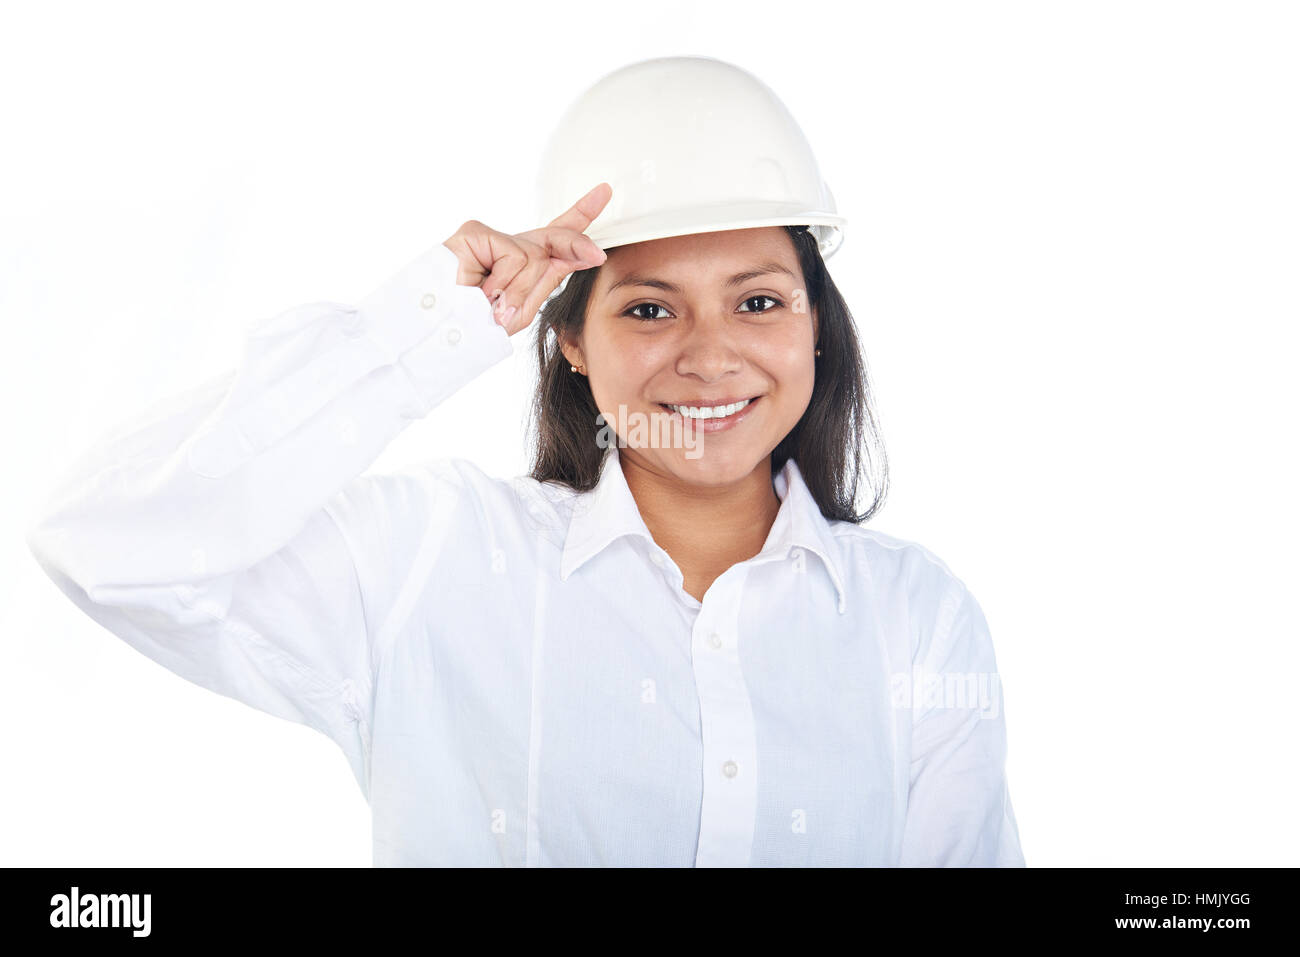 young engineer woman with hard hat isolated Stock Photo